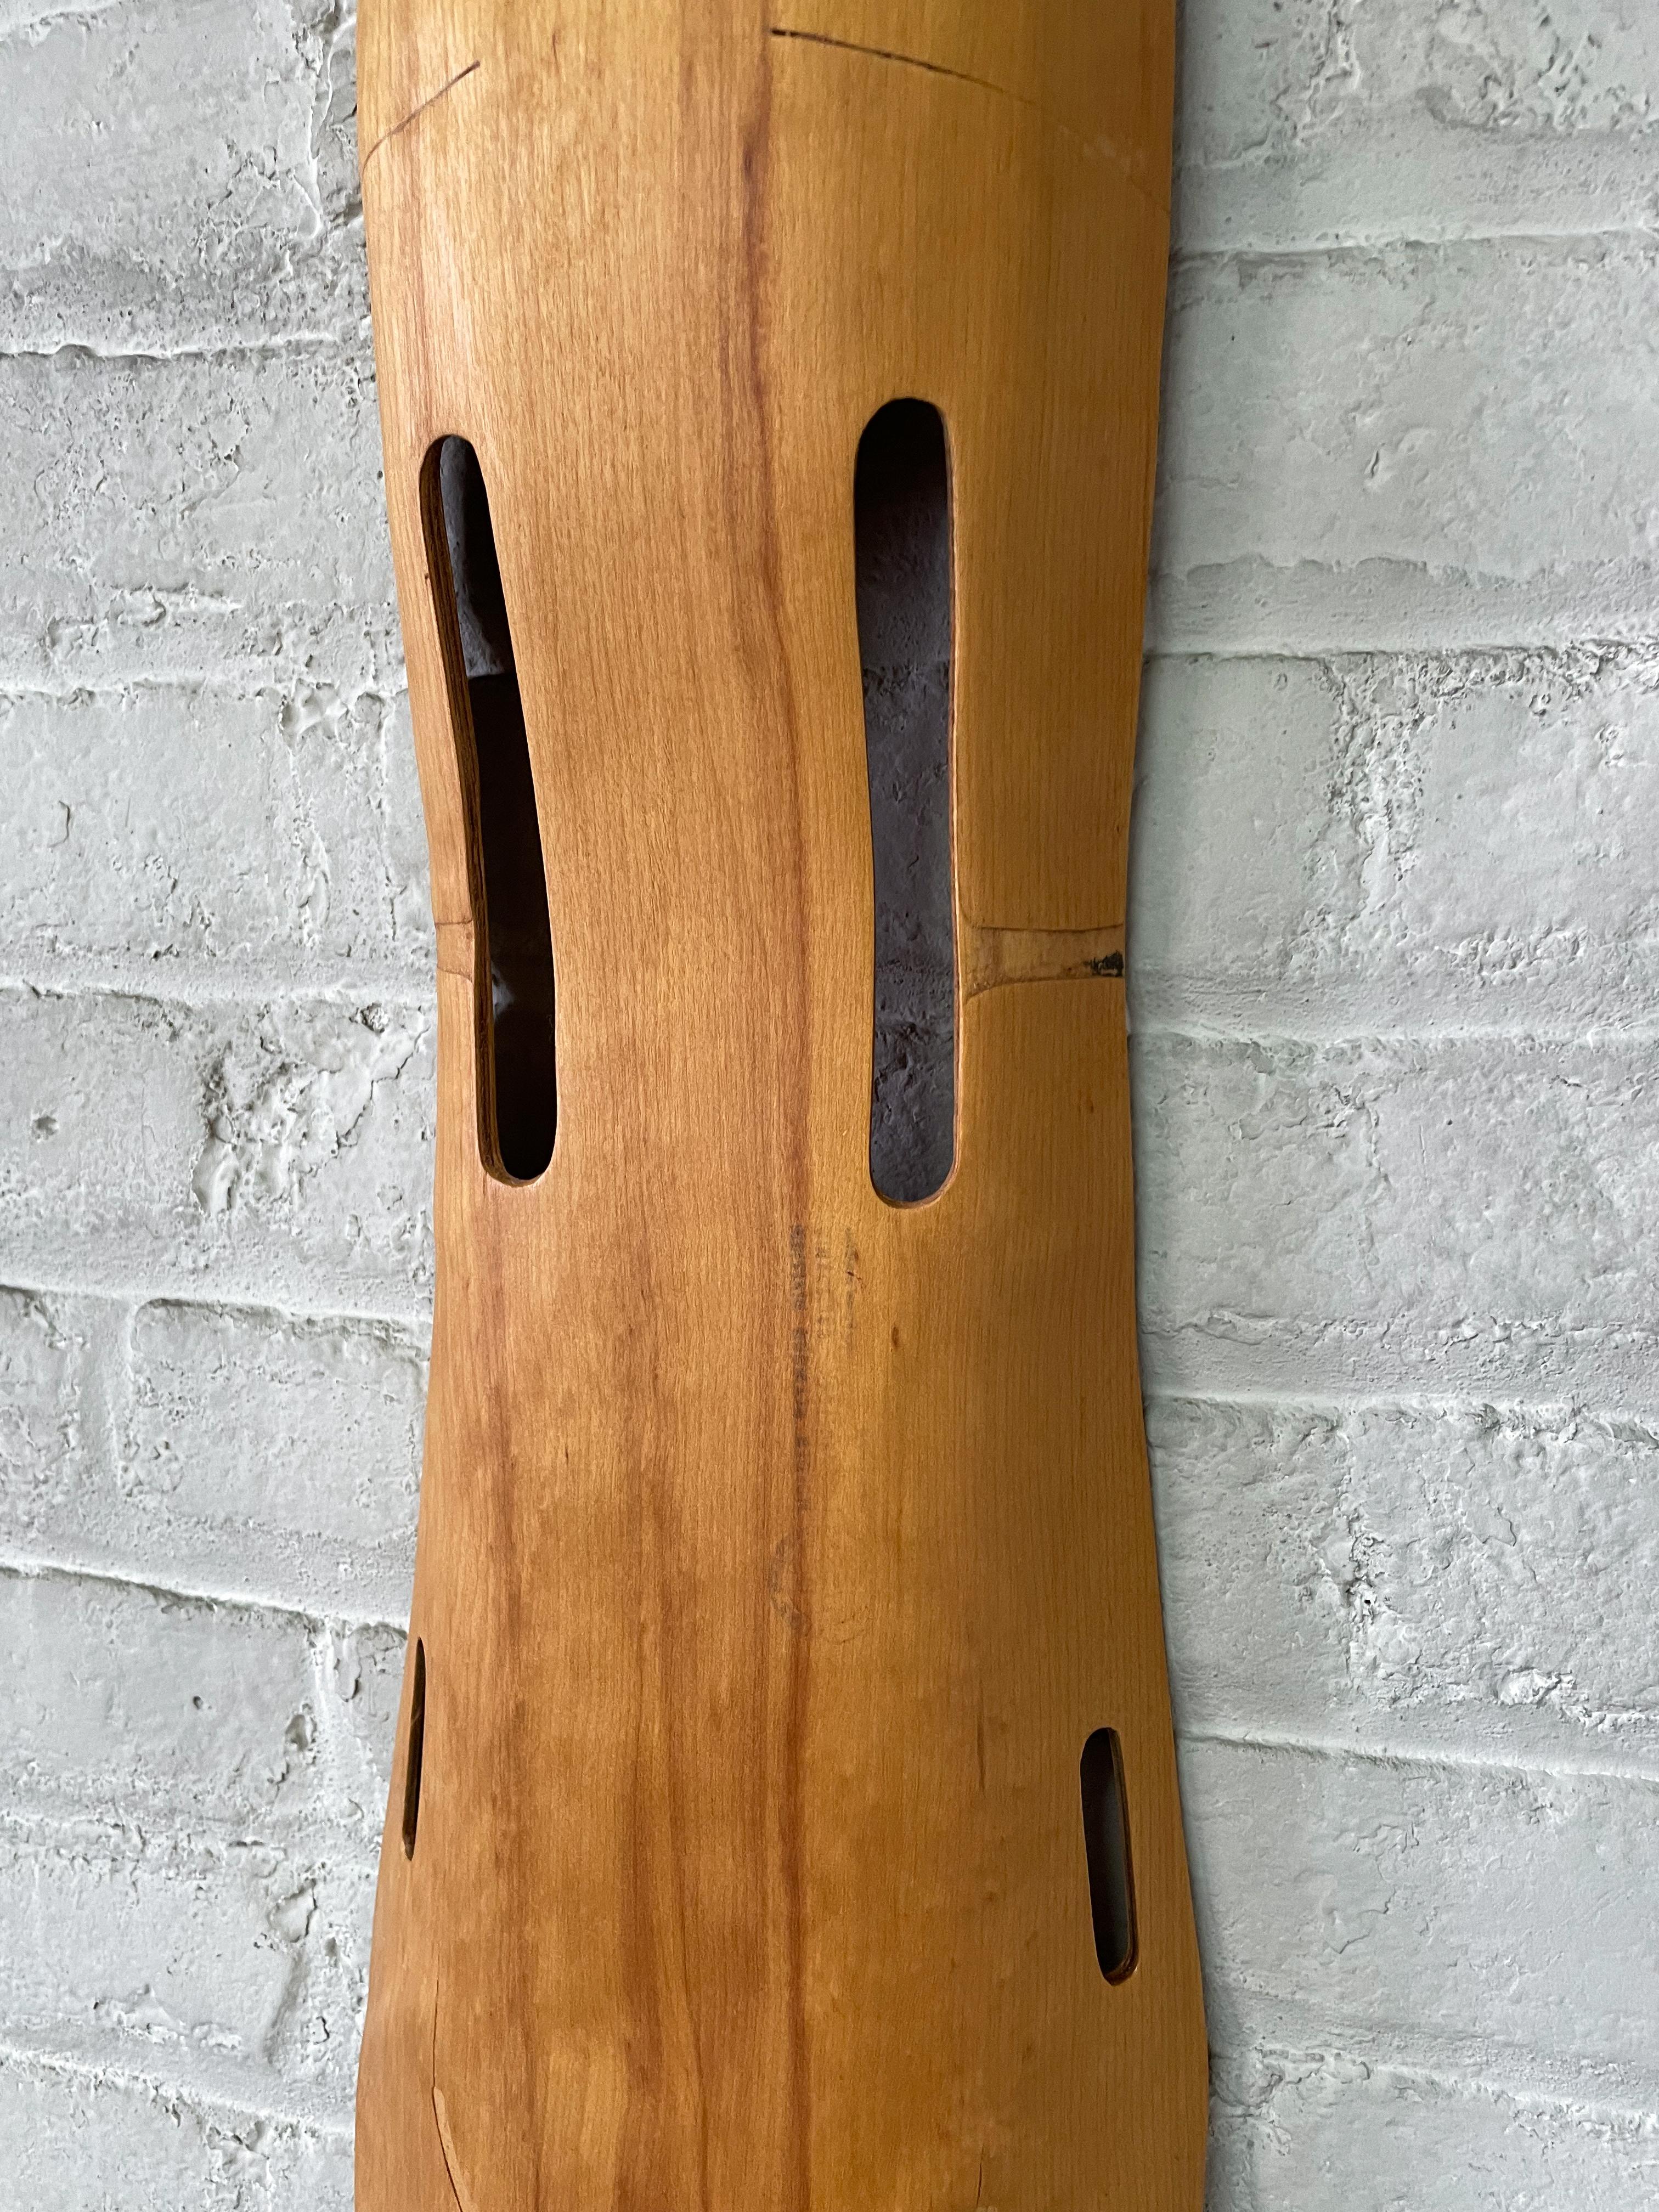 Mid-Century Modern Eames Molded Plywood Leg Splint for Evans Products